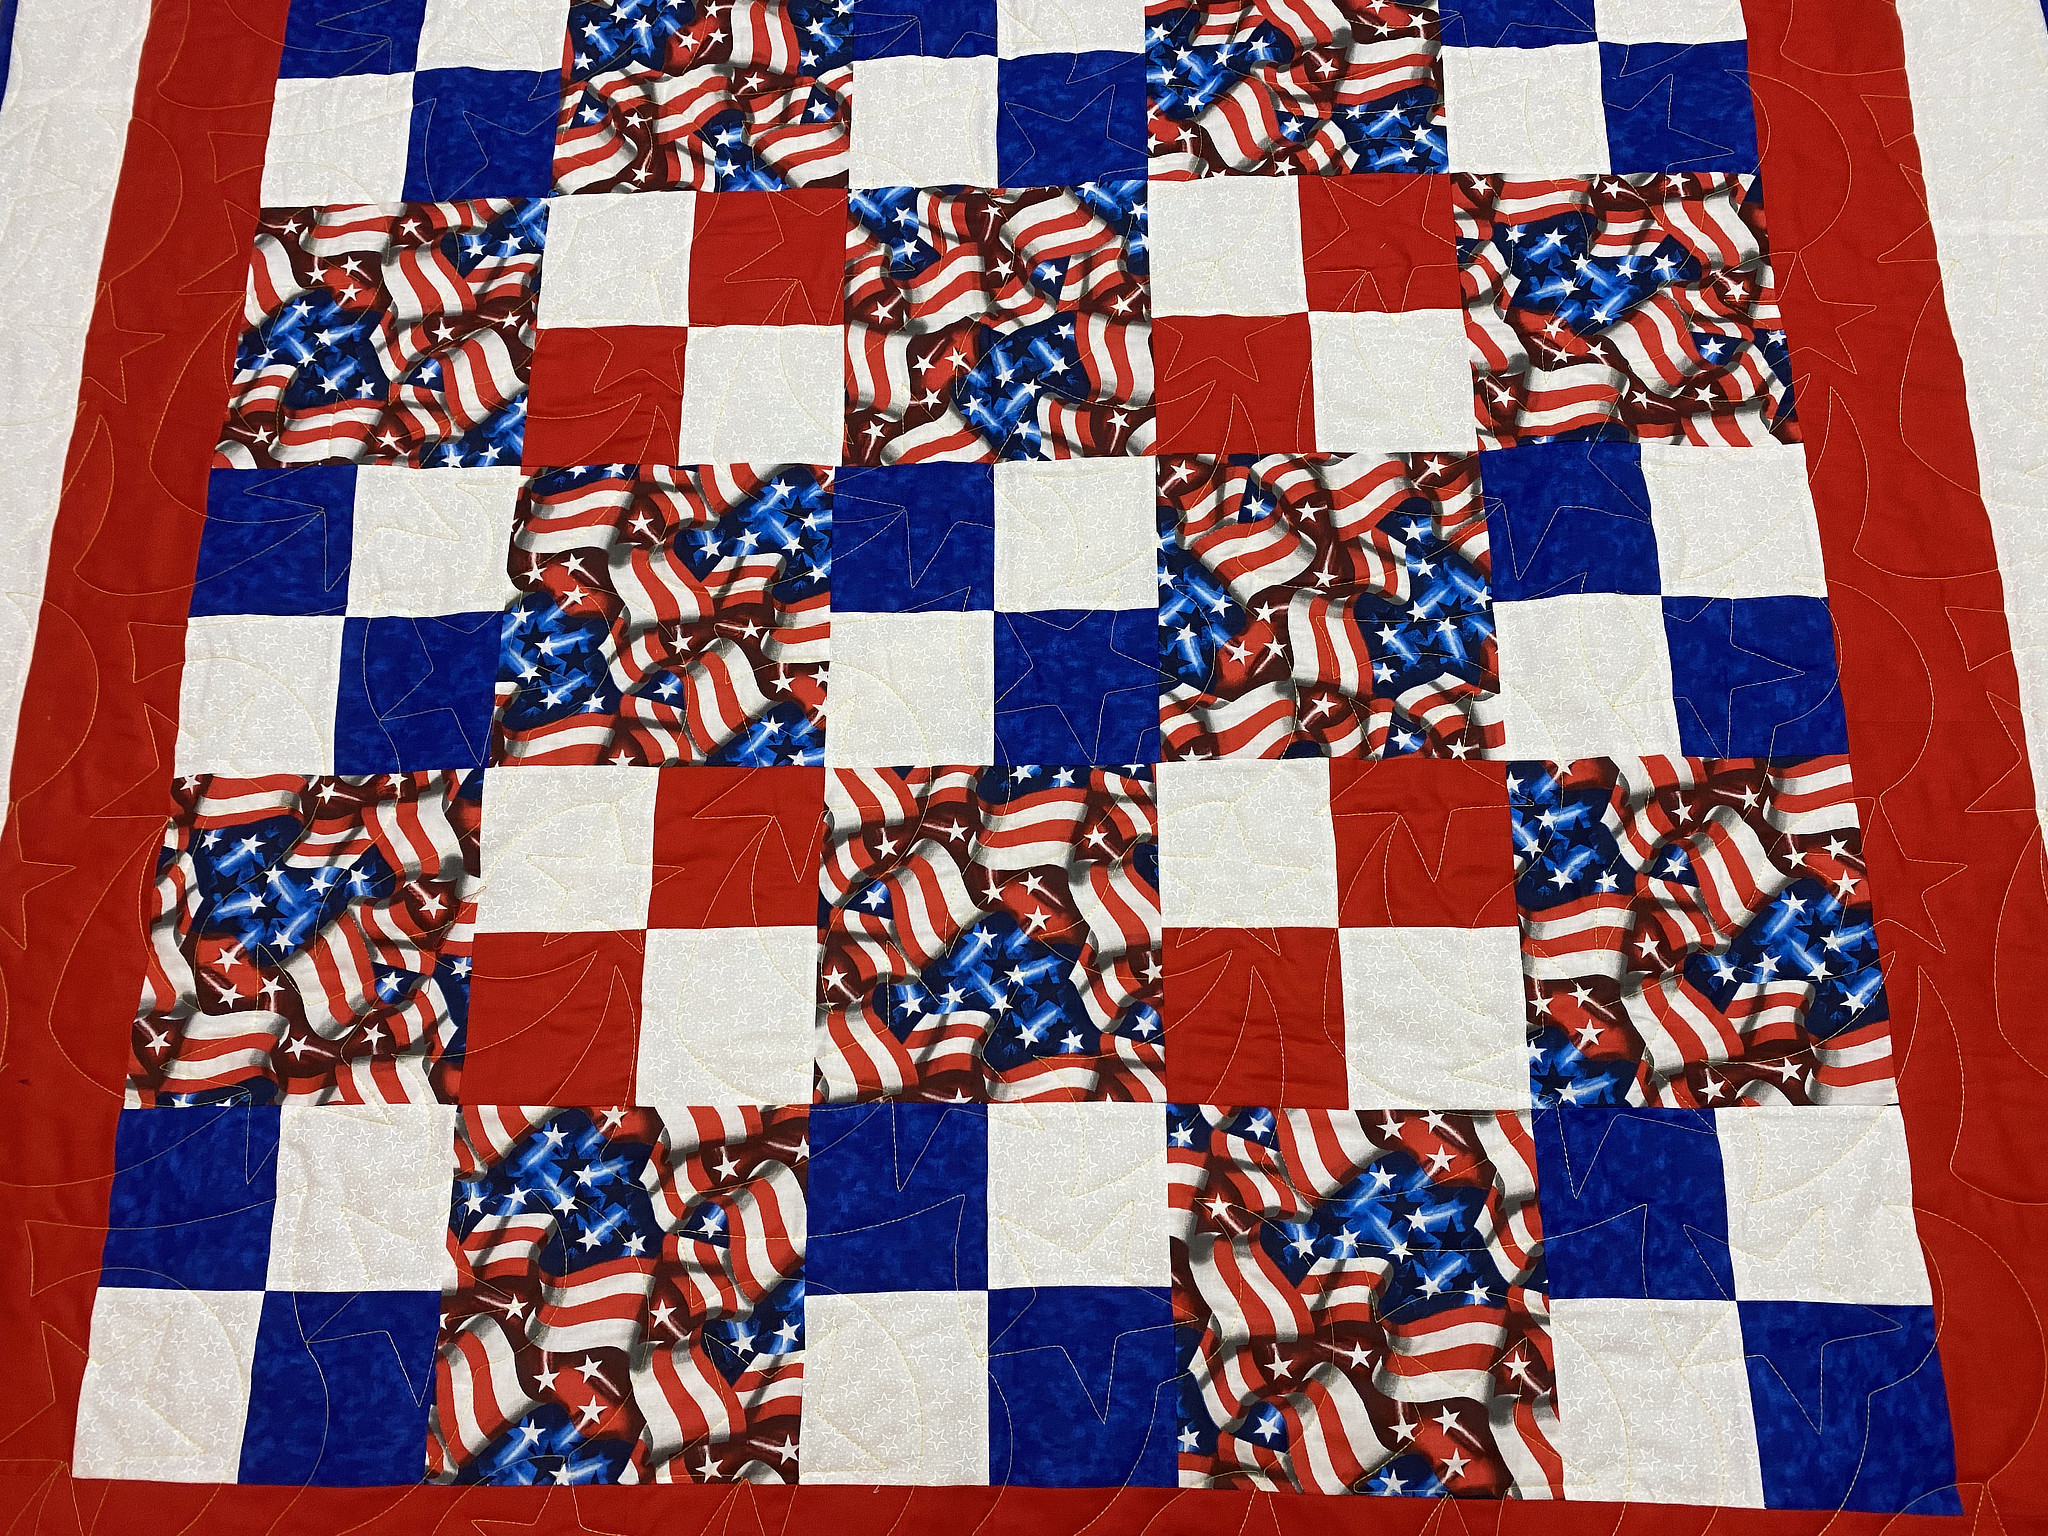 Carole’s Red, White & Blue Quilt